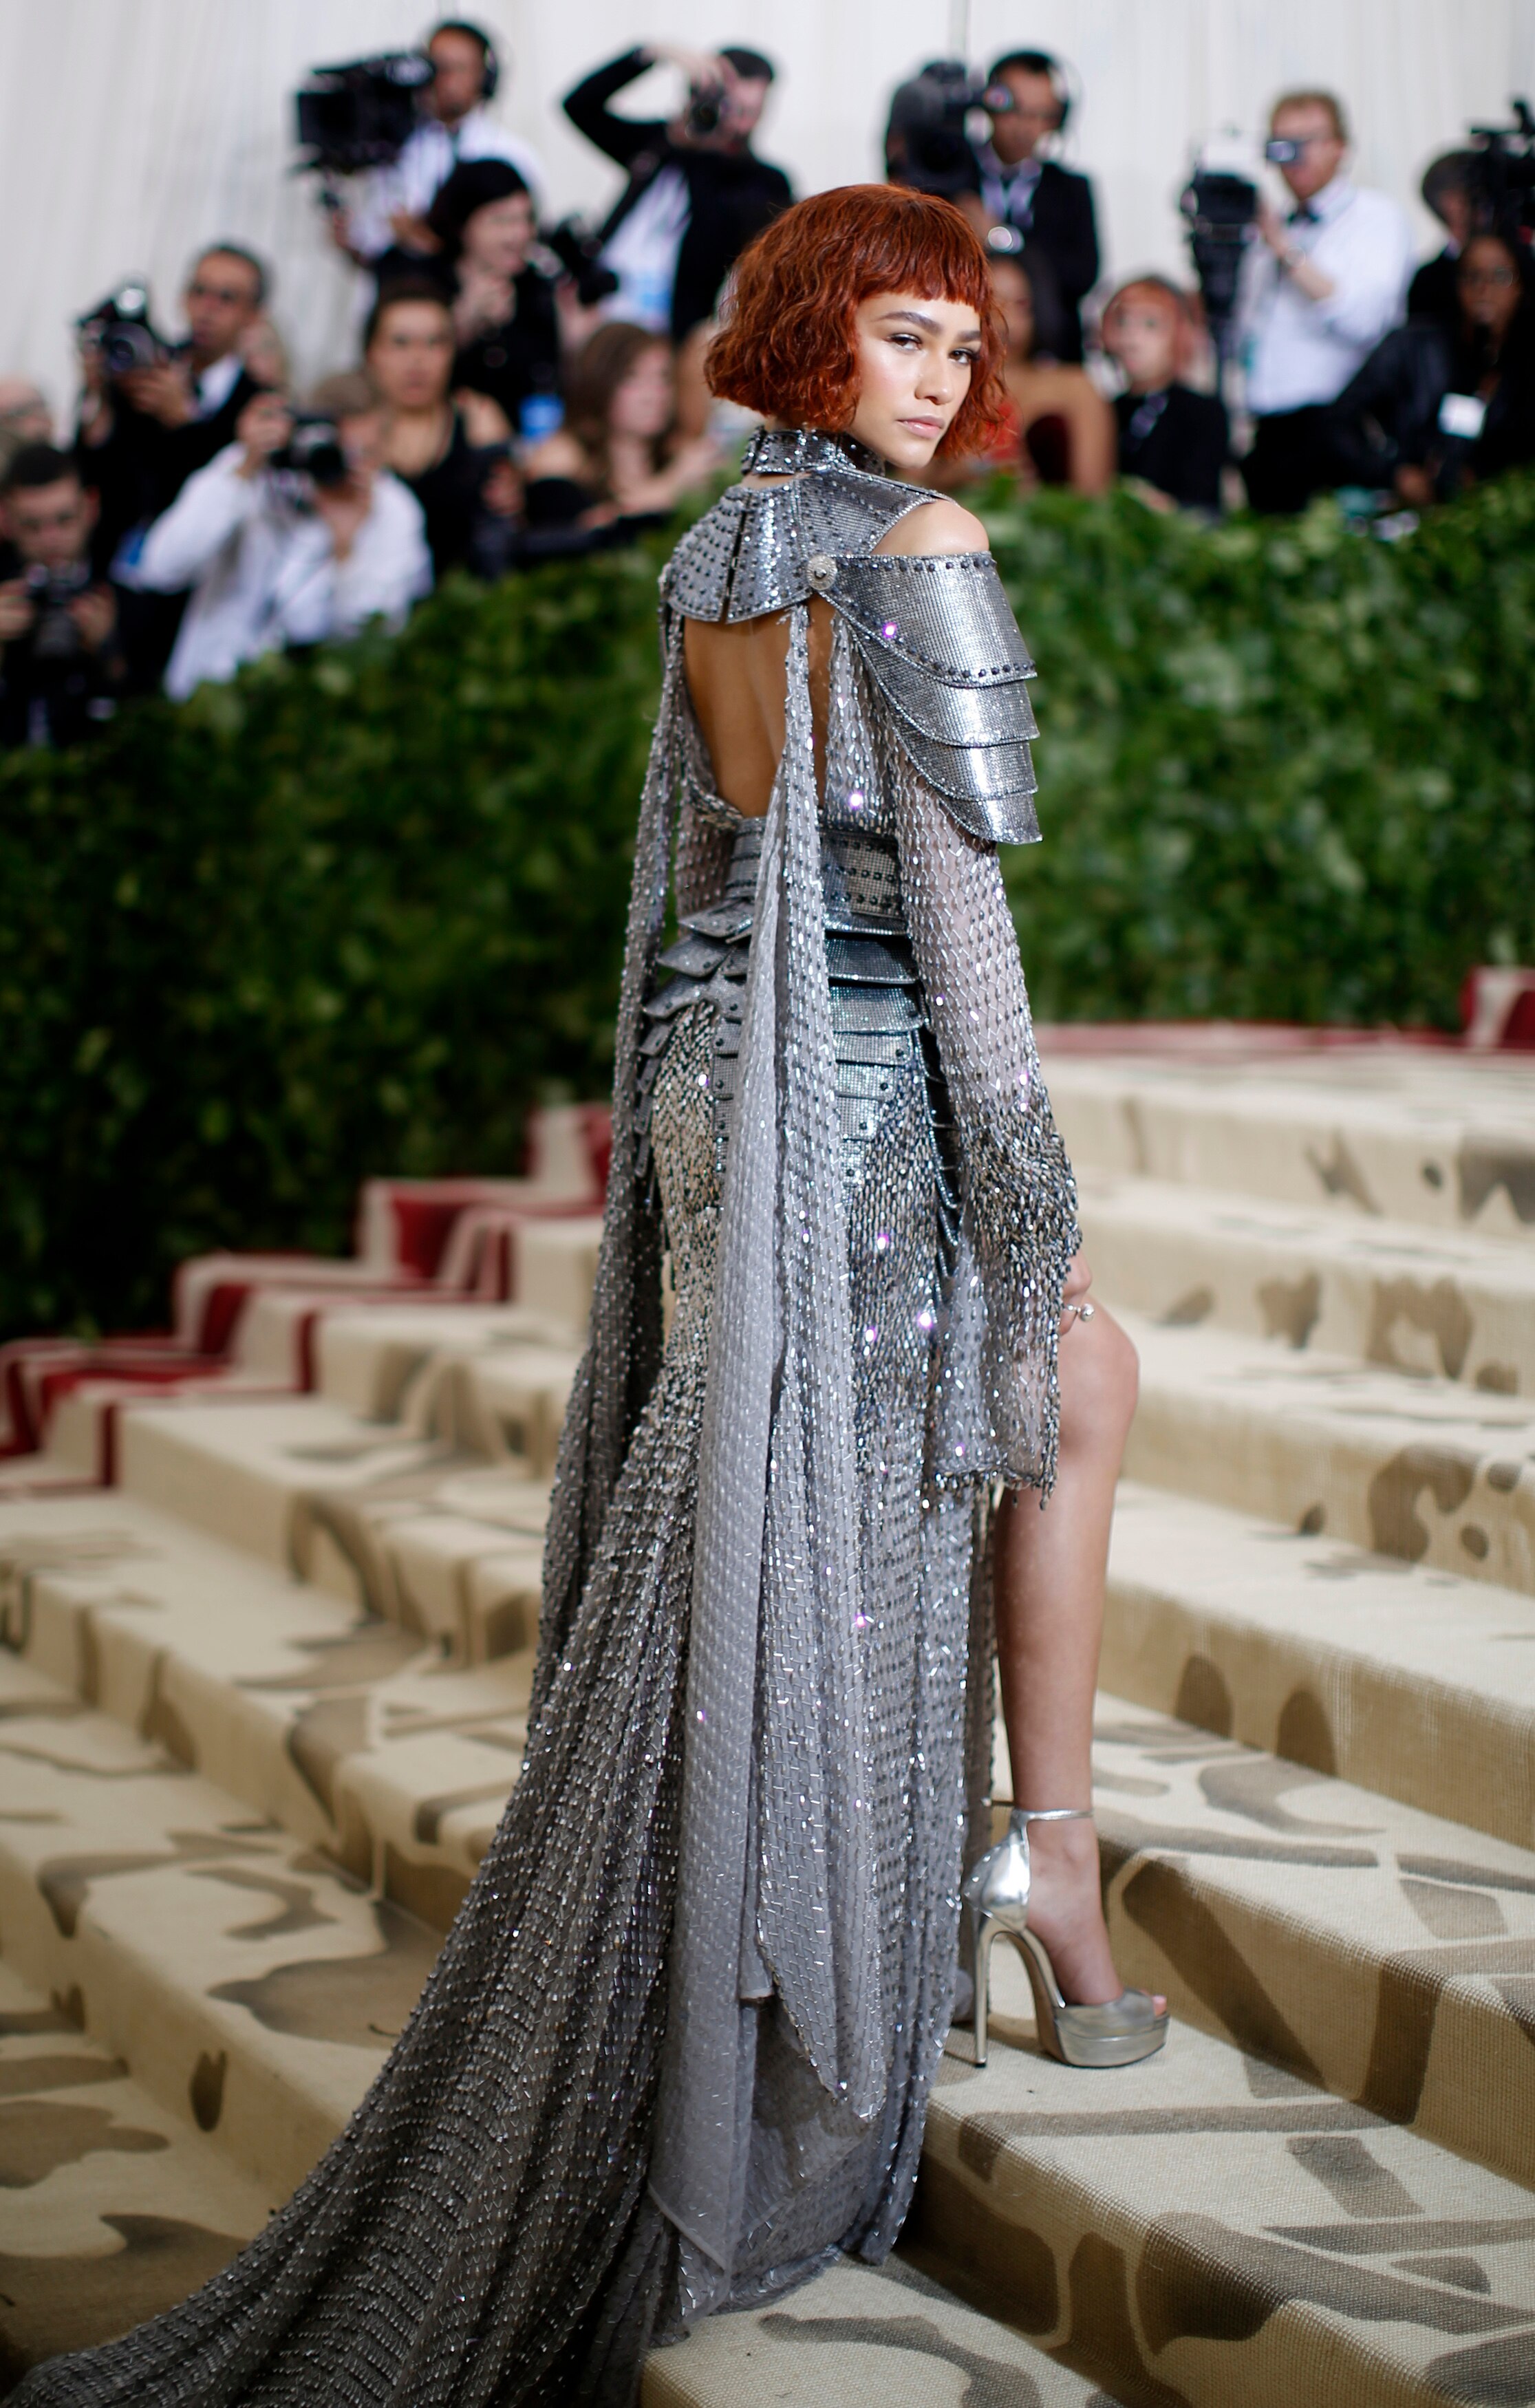 Zendaya wearing a silver metallic dress with chain-mail-like fabric and armour-like shoulder detailing